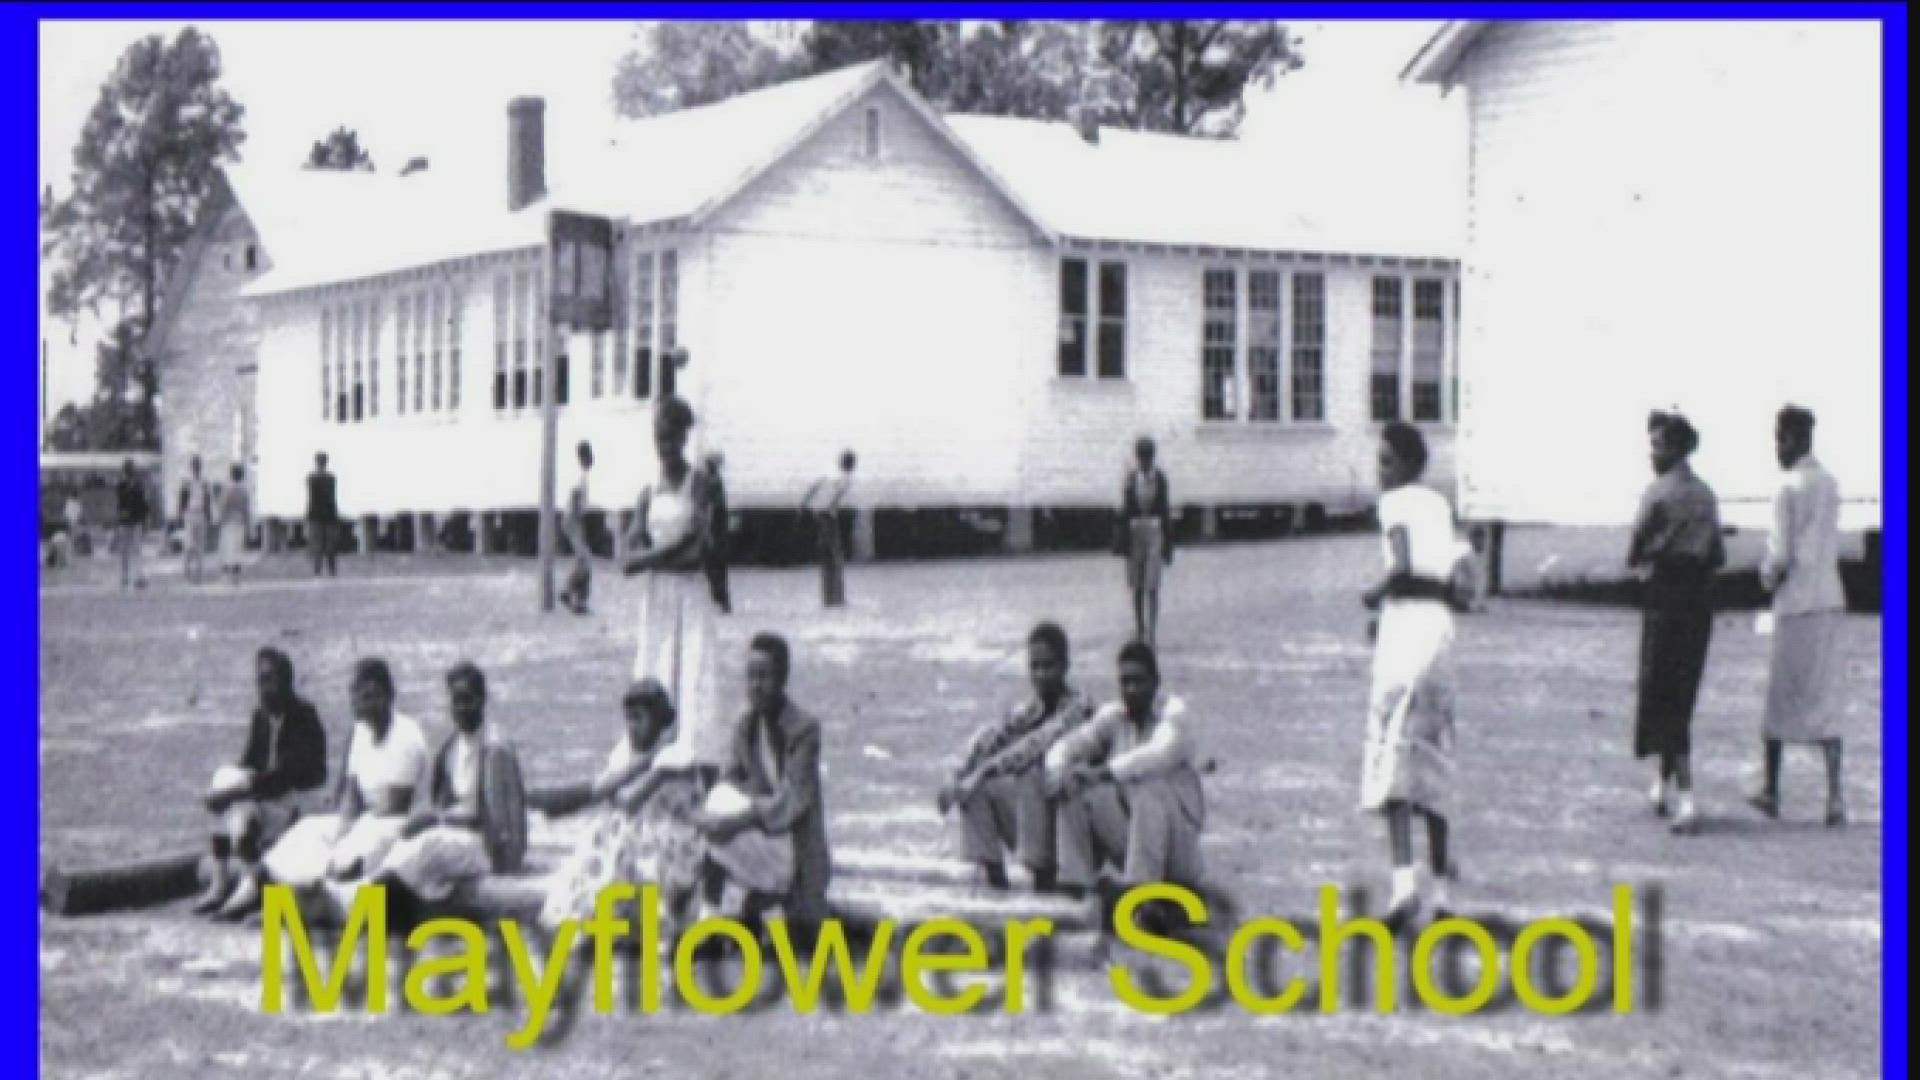 Tatum football team honors legacy of all-Black Mayflower School with jerseys in honor of 55th anniversary of merger